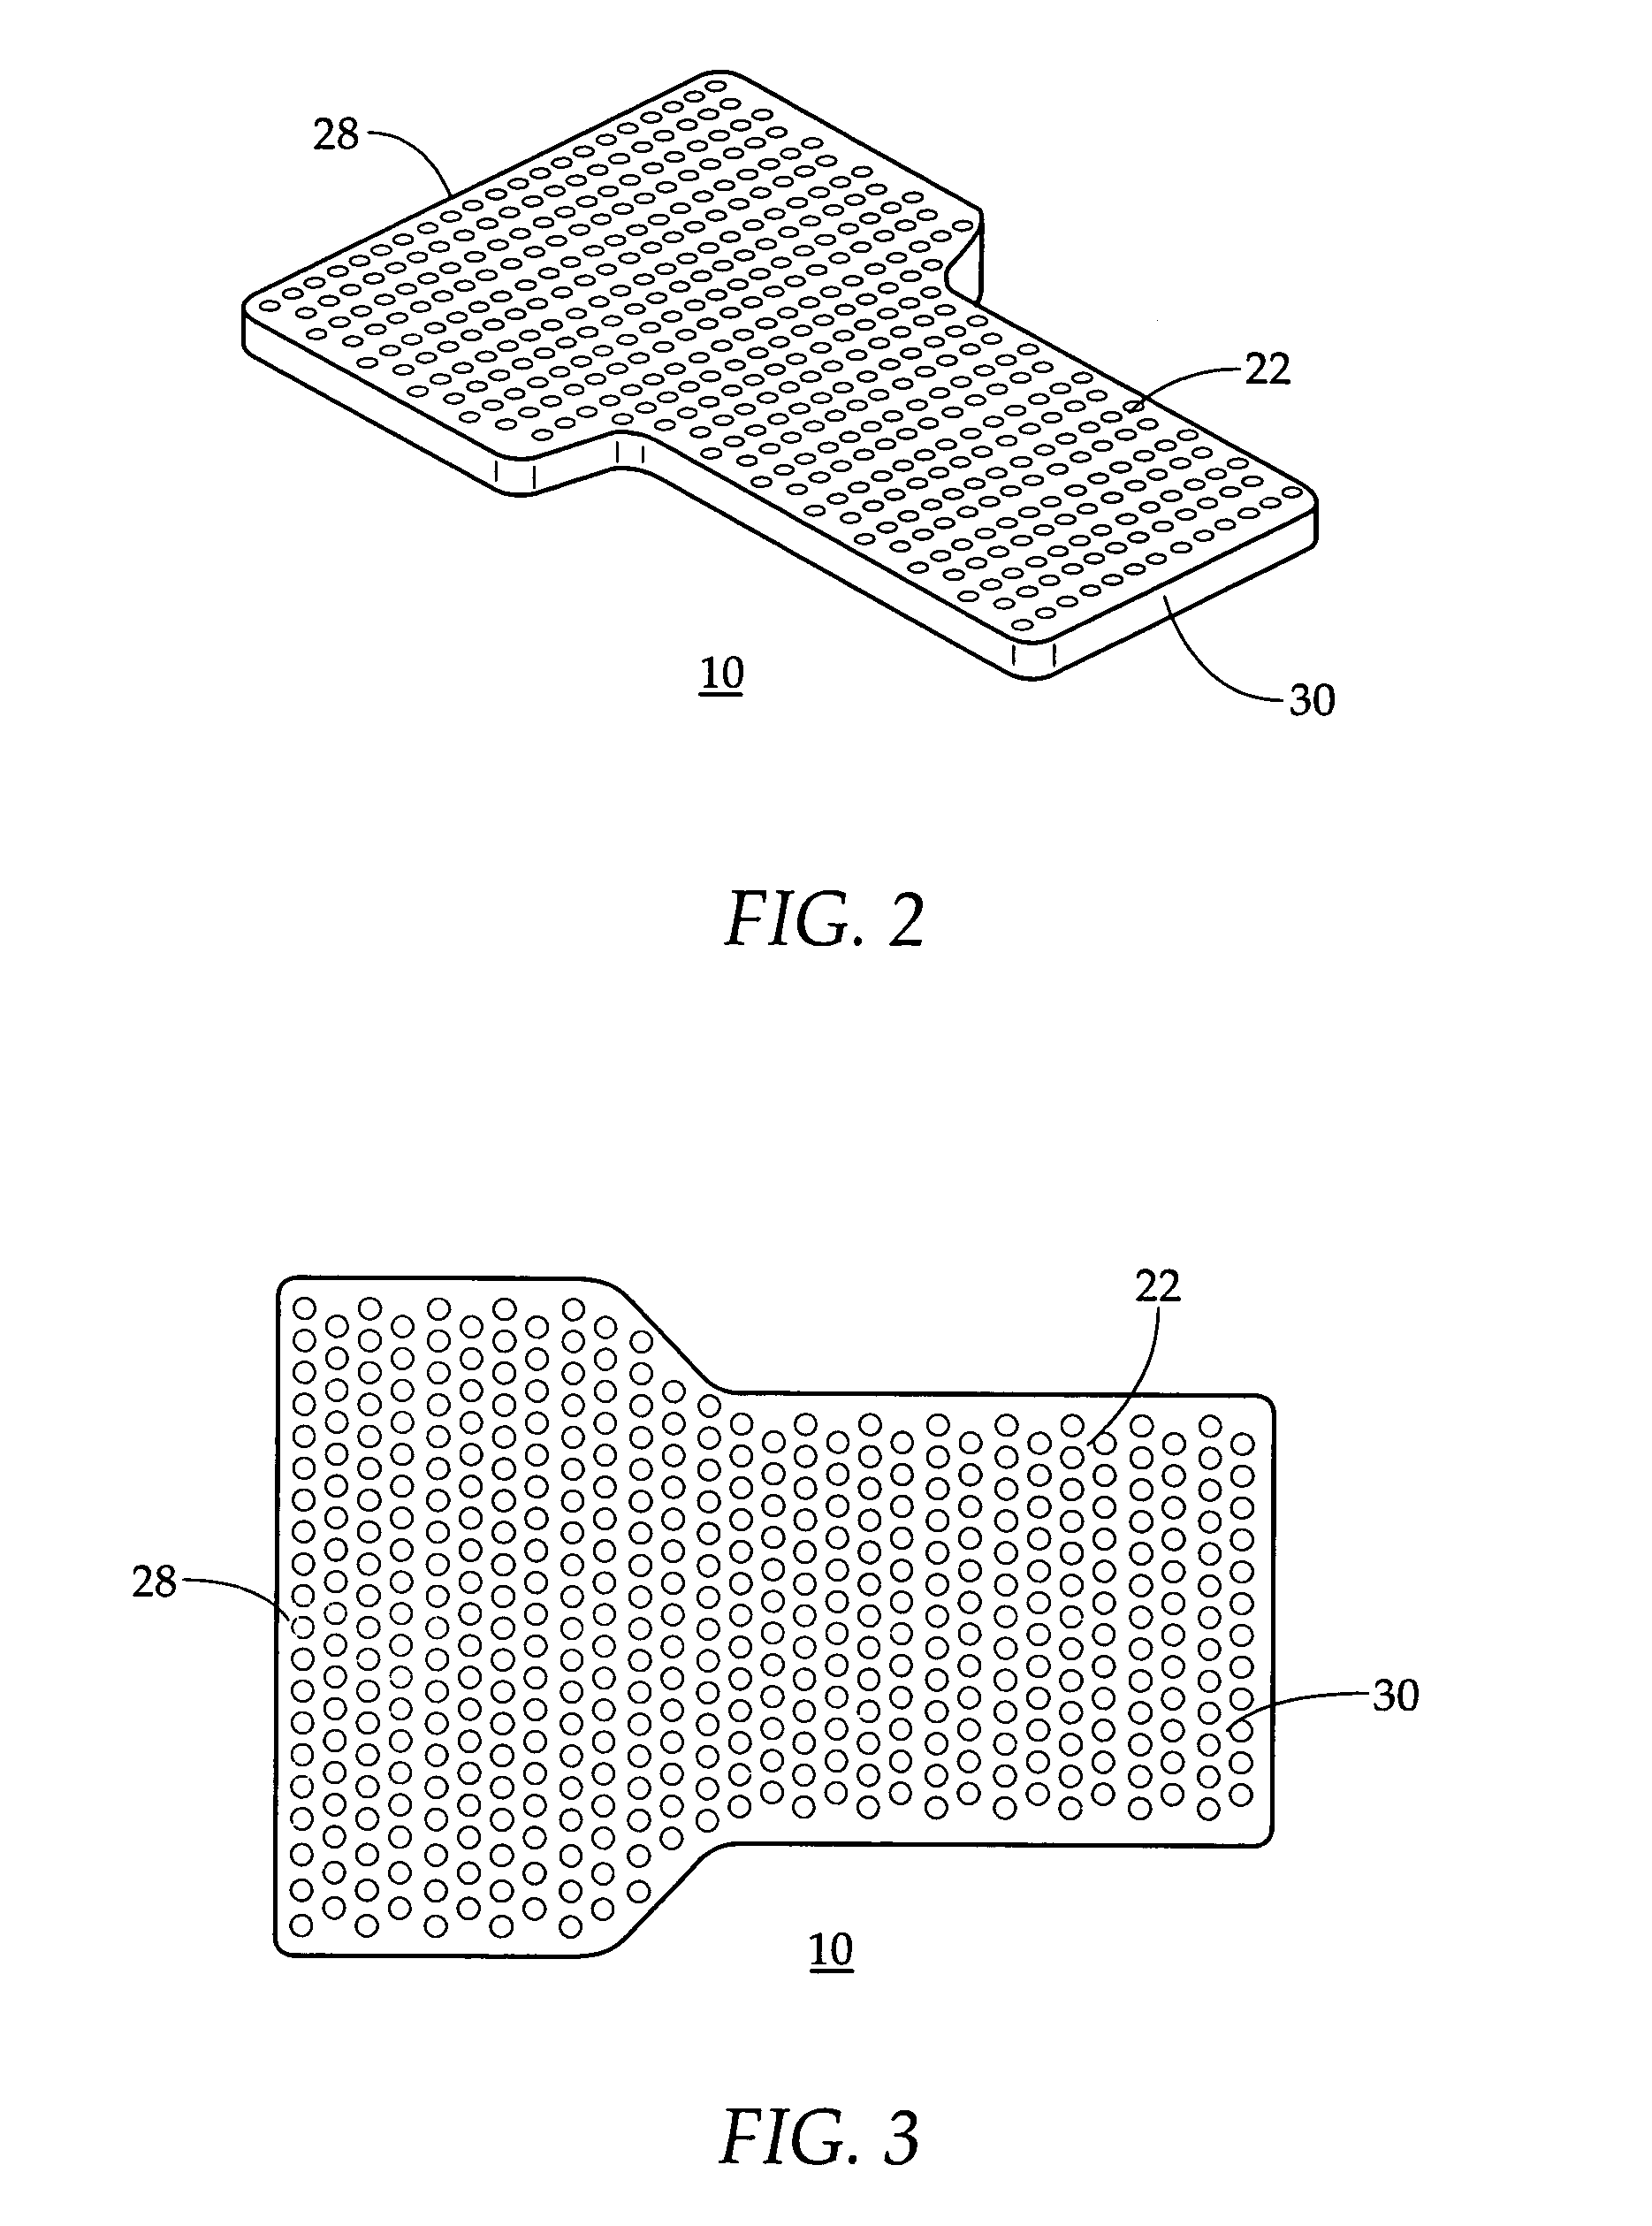 Pad for reducing or dampening noise or vibration